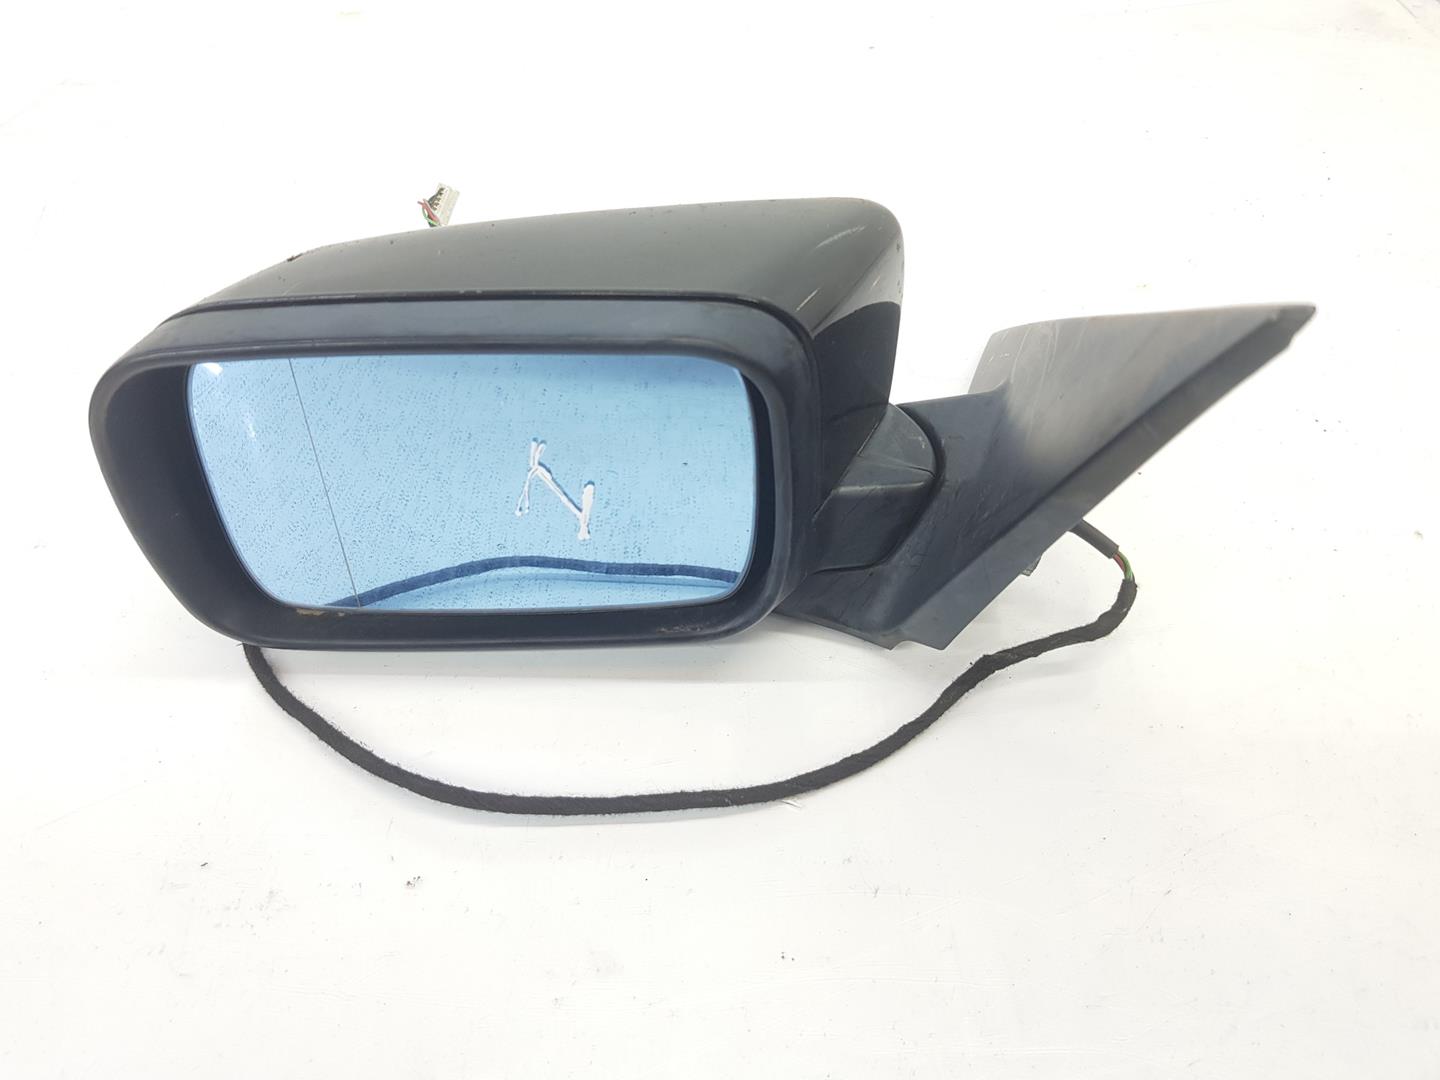 BMW 3 Series E46 (1997-2006) Left Side Wing Mirror 51168245125, 51168245125, COLORNEGRO475 19809424